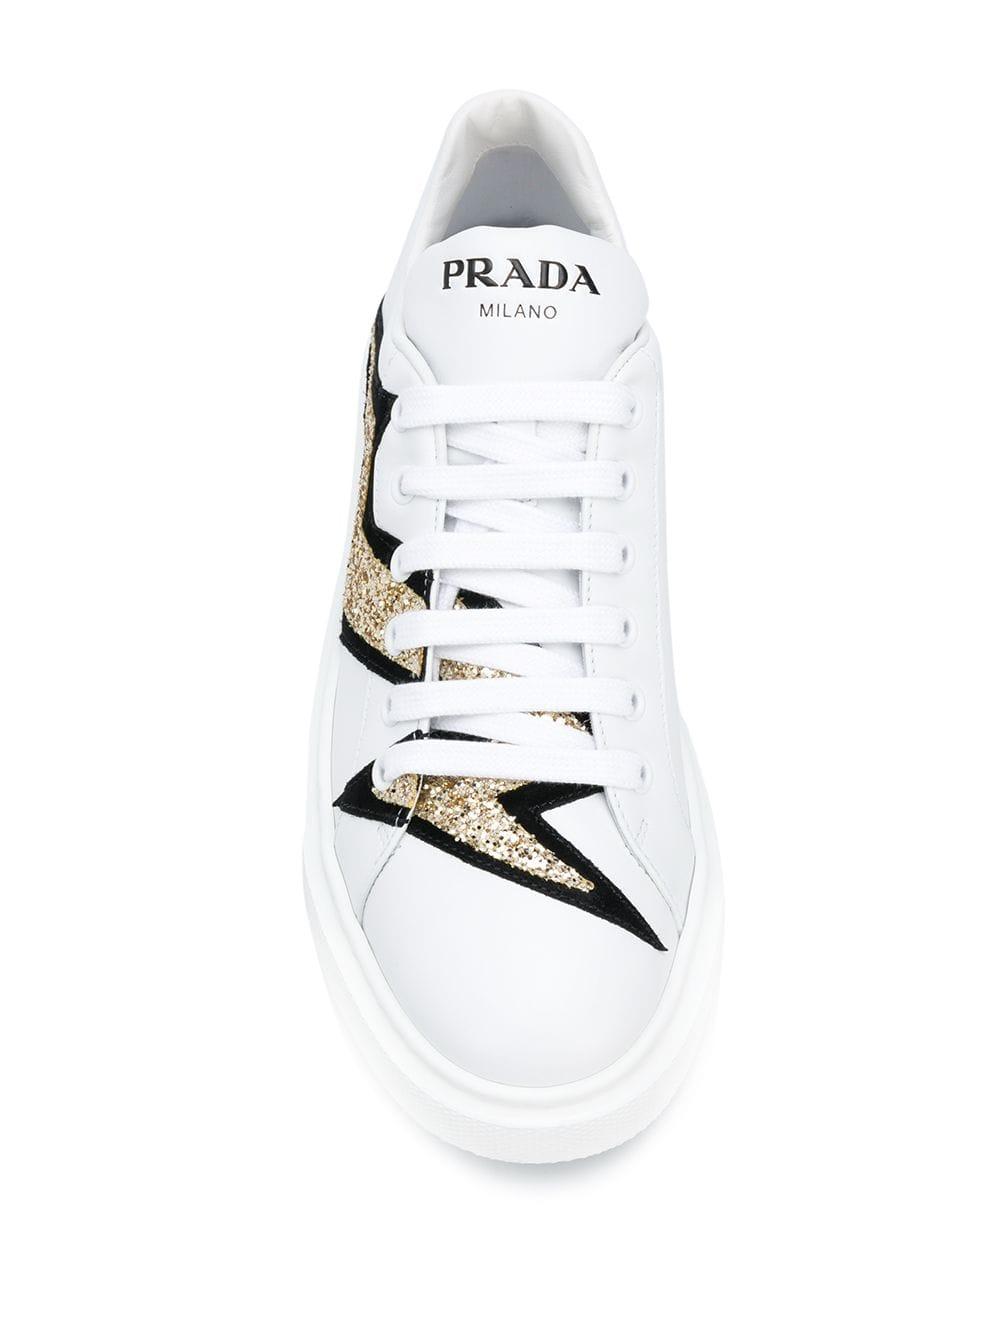 Prada Leather Lightning Bolt Low-top Sneakers in White | Lyst